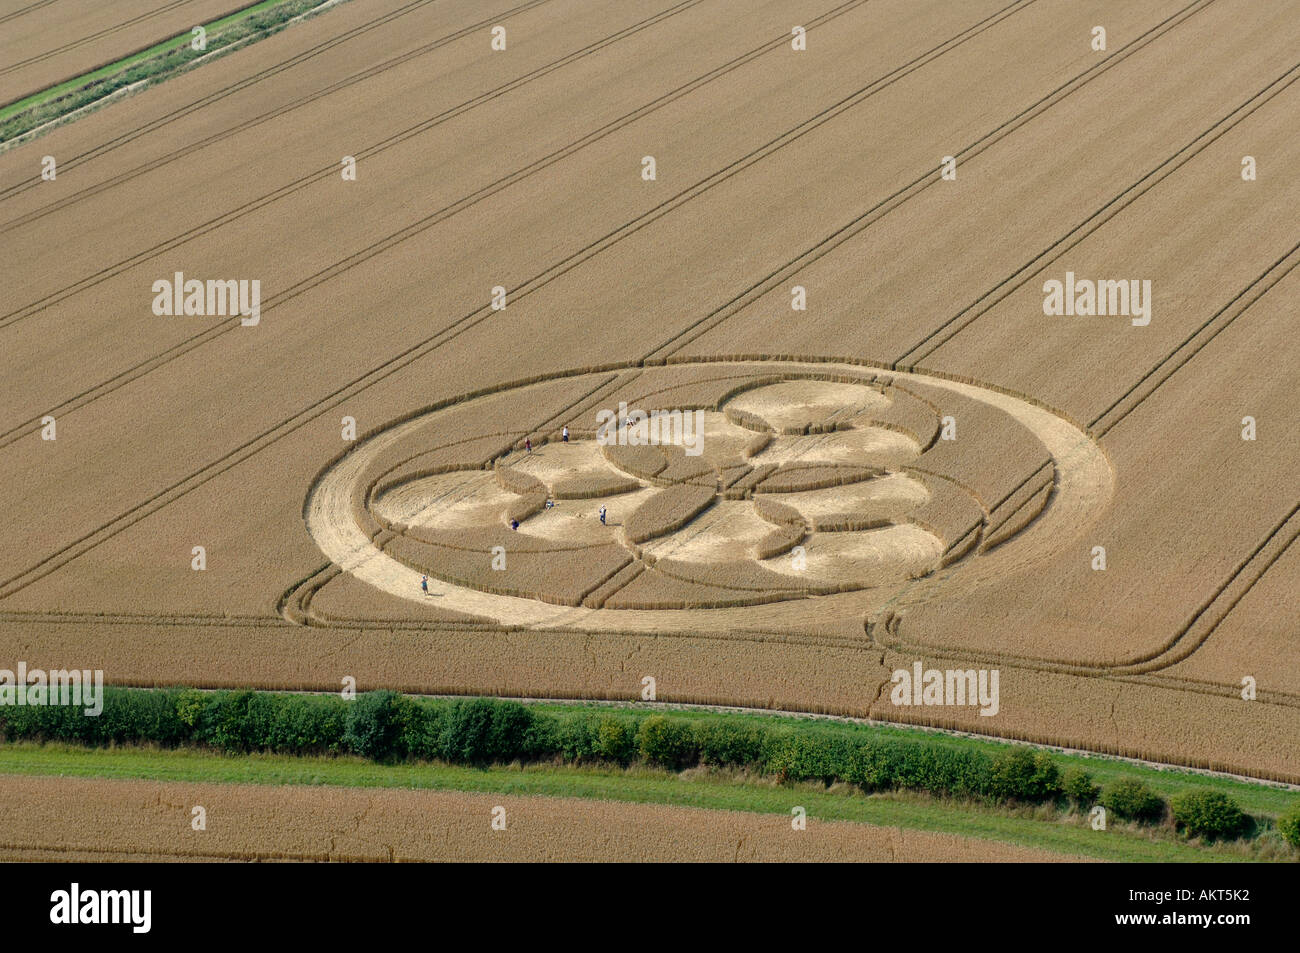 Crop circles in Wiltshire England Stock Photo